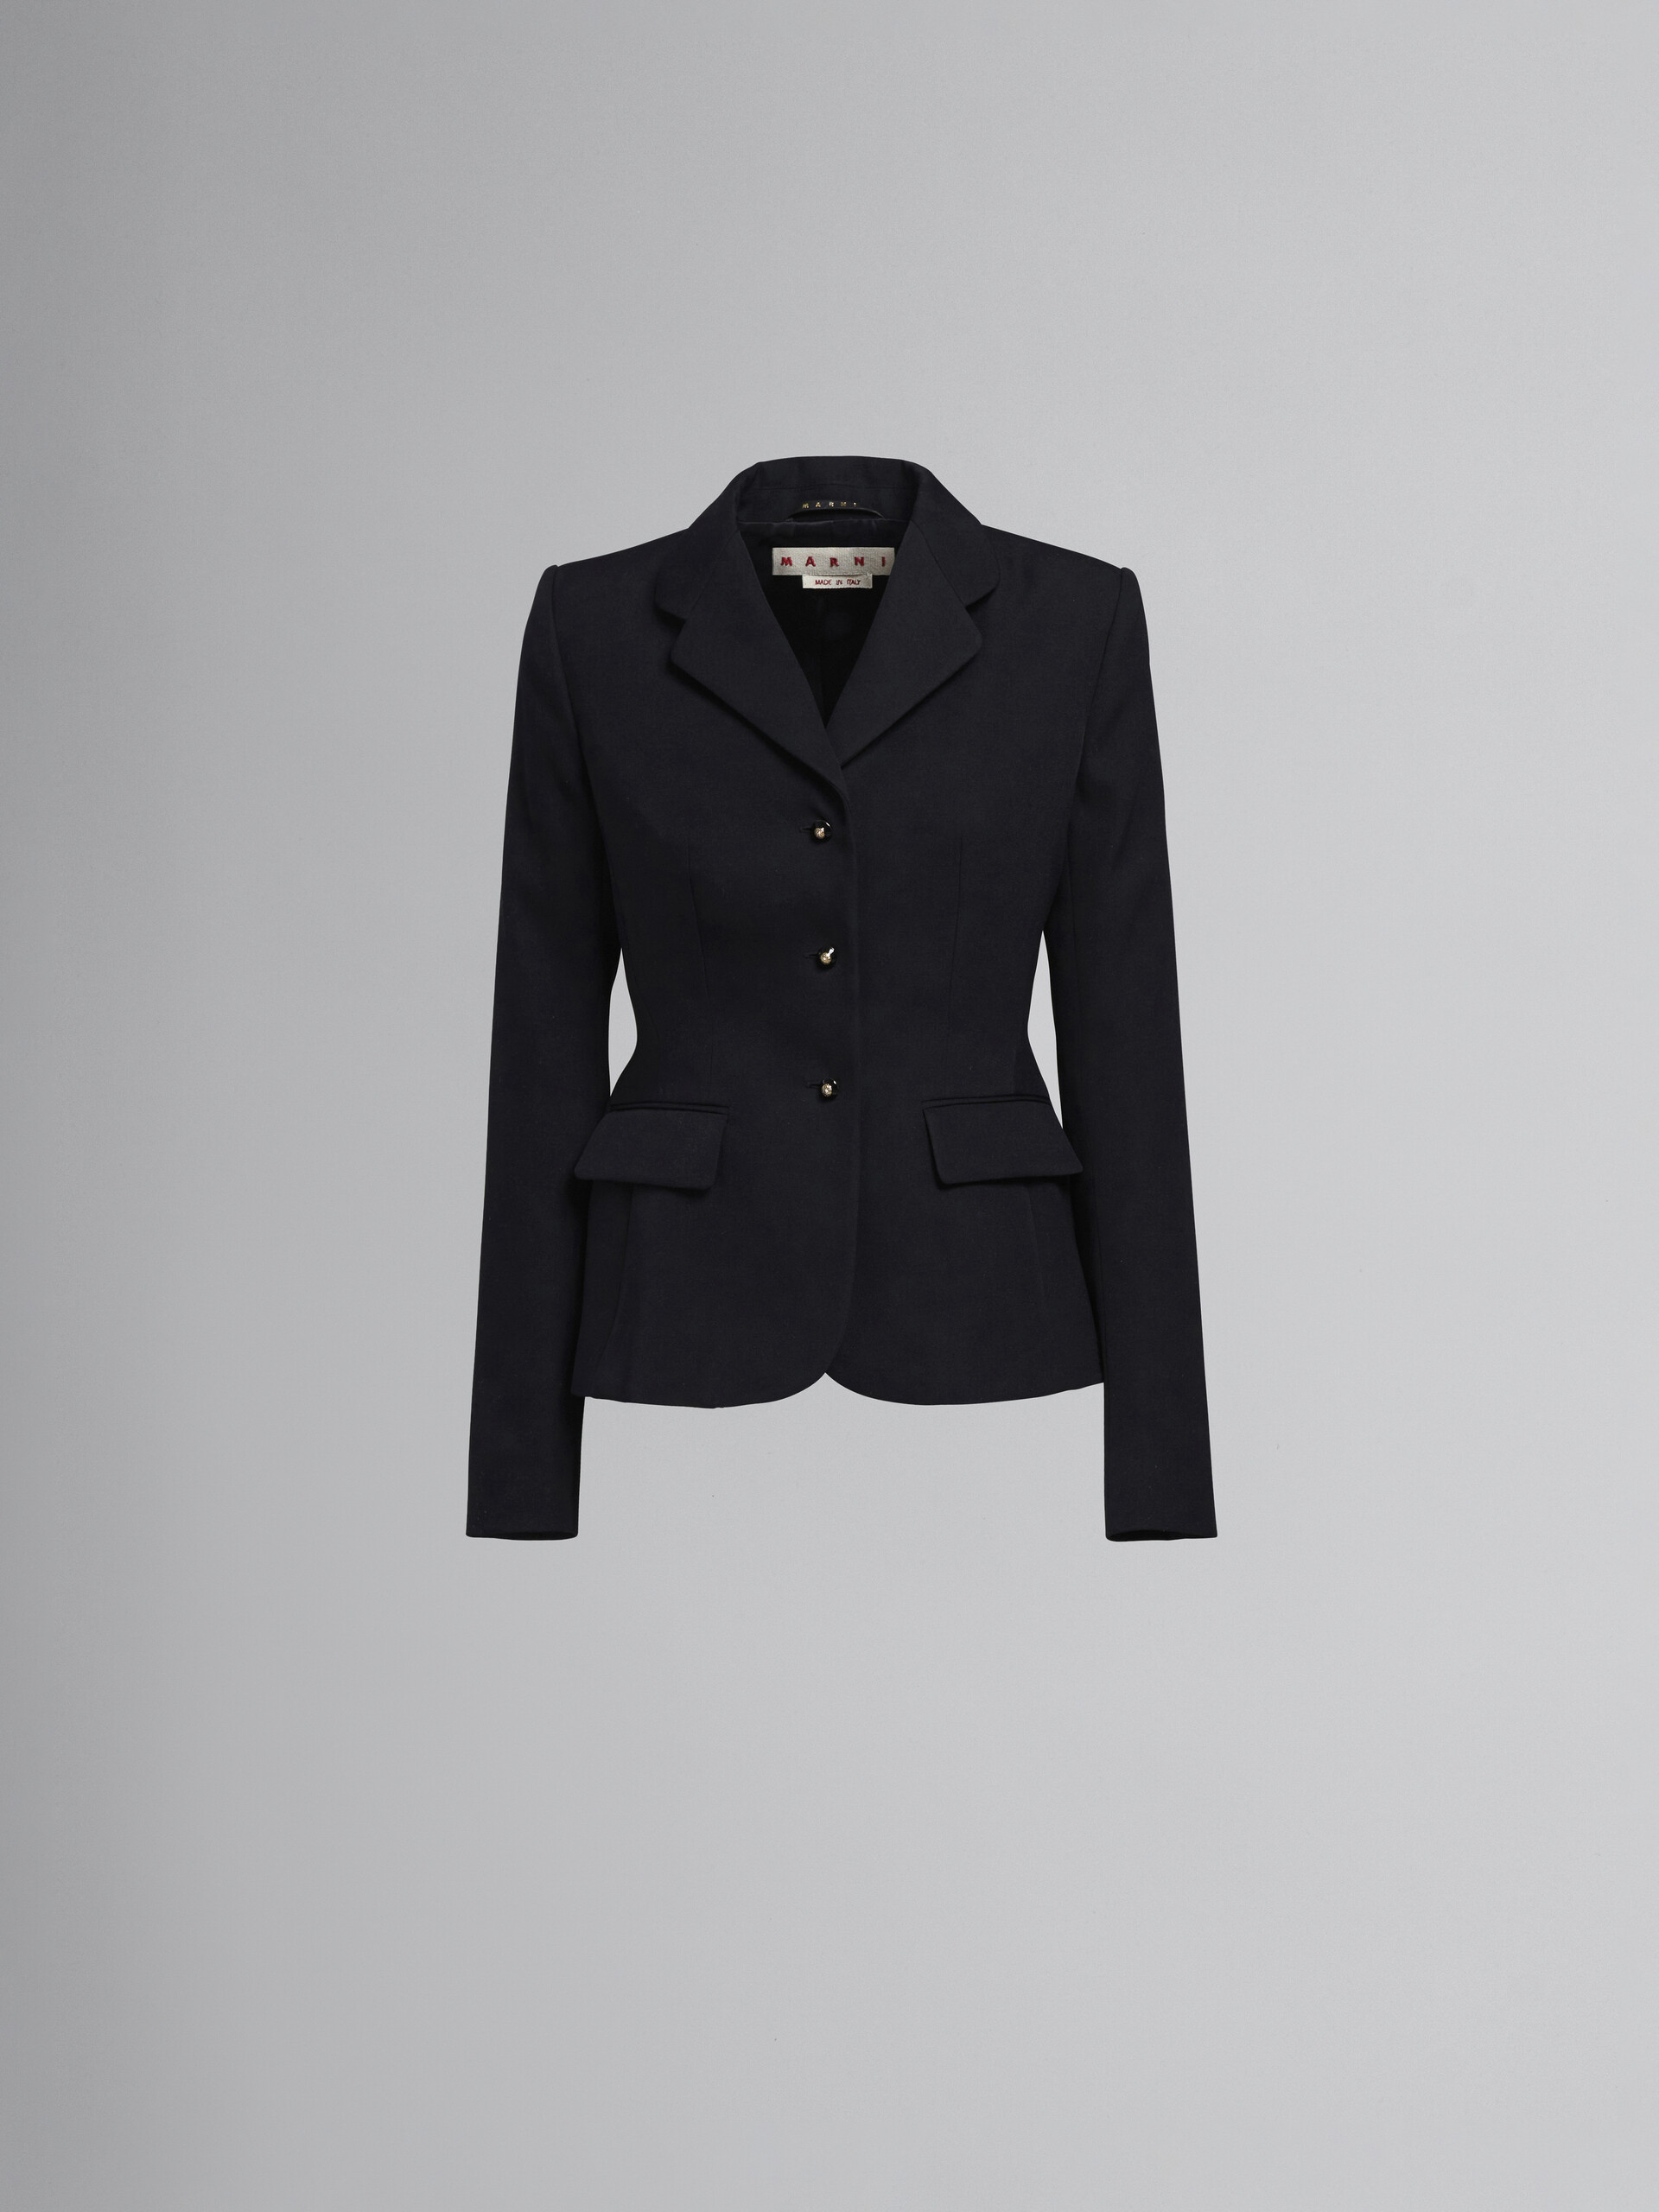 Black fitted wool blazer - Jackets - Image 1